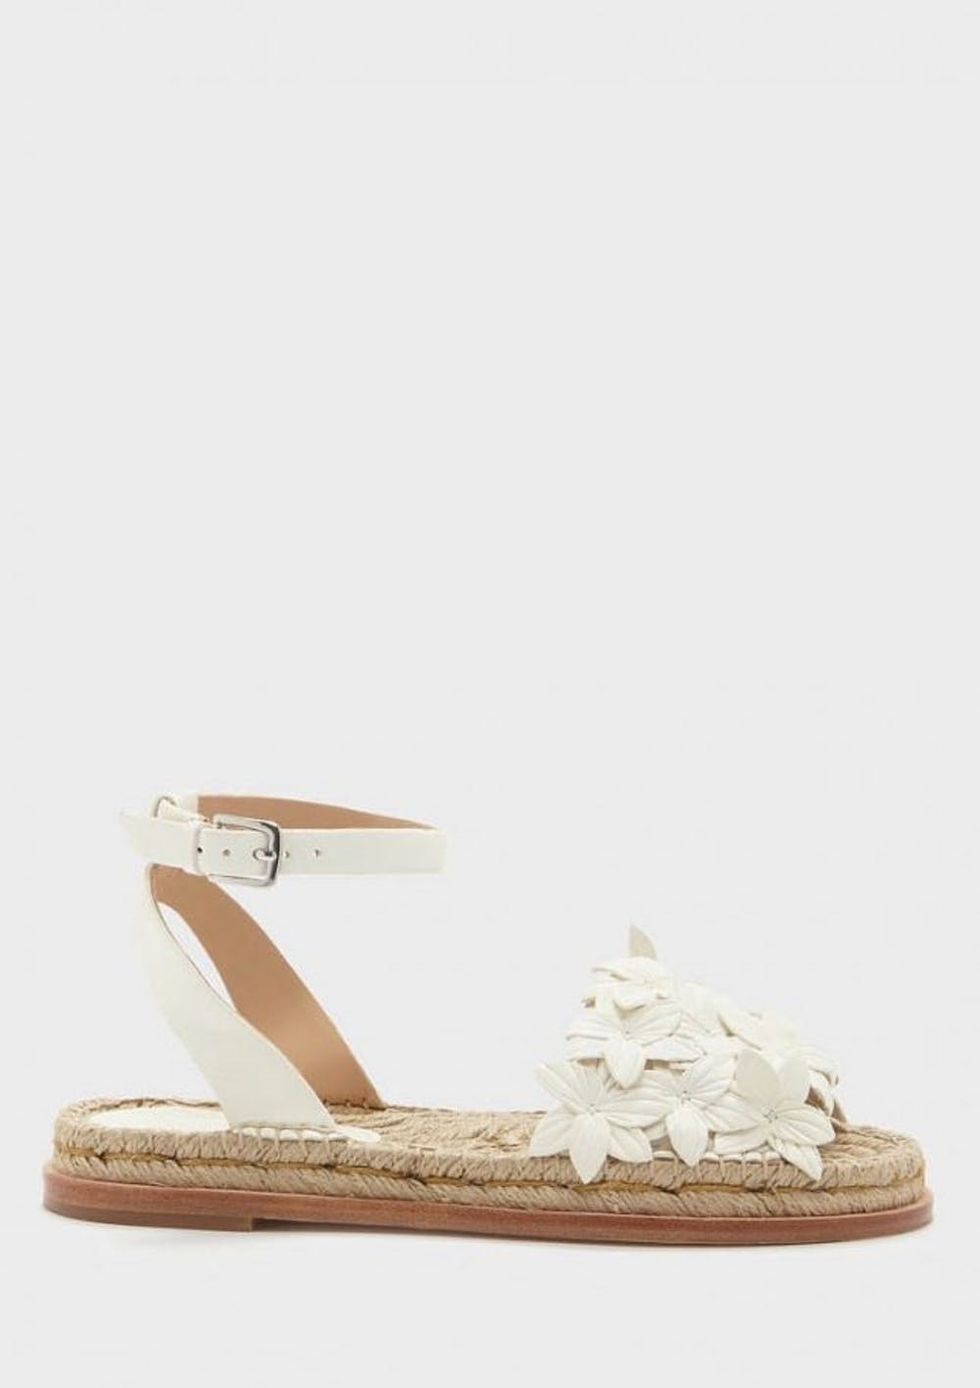 12 Shoes That Can Survive an Outdoor Wedding - Brit + Co